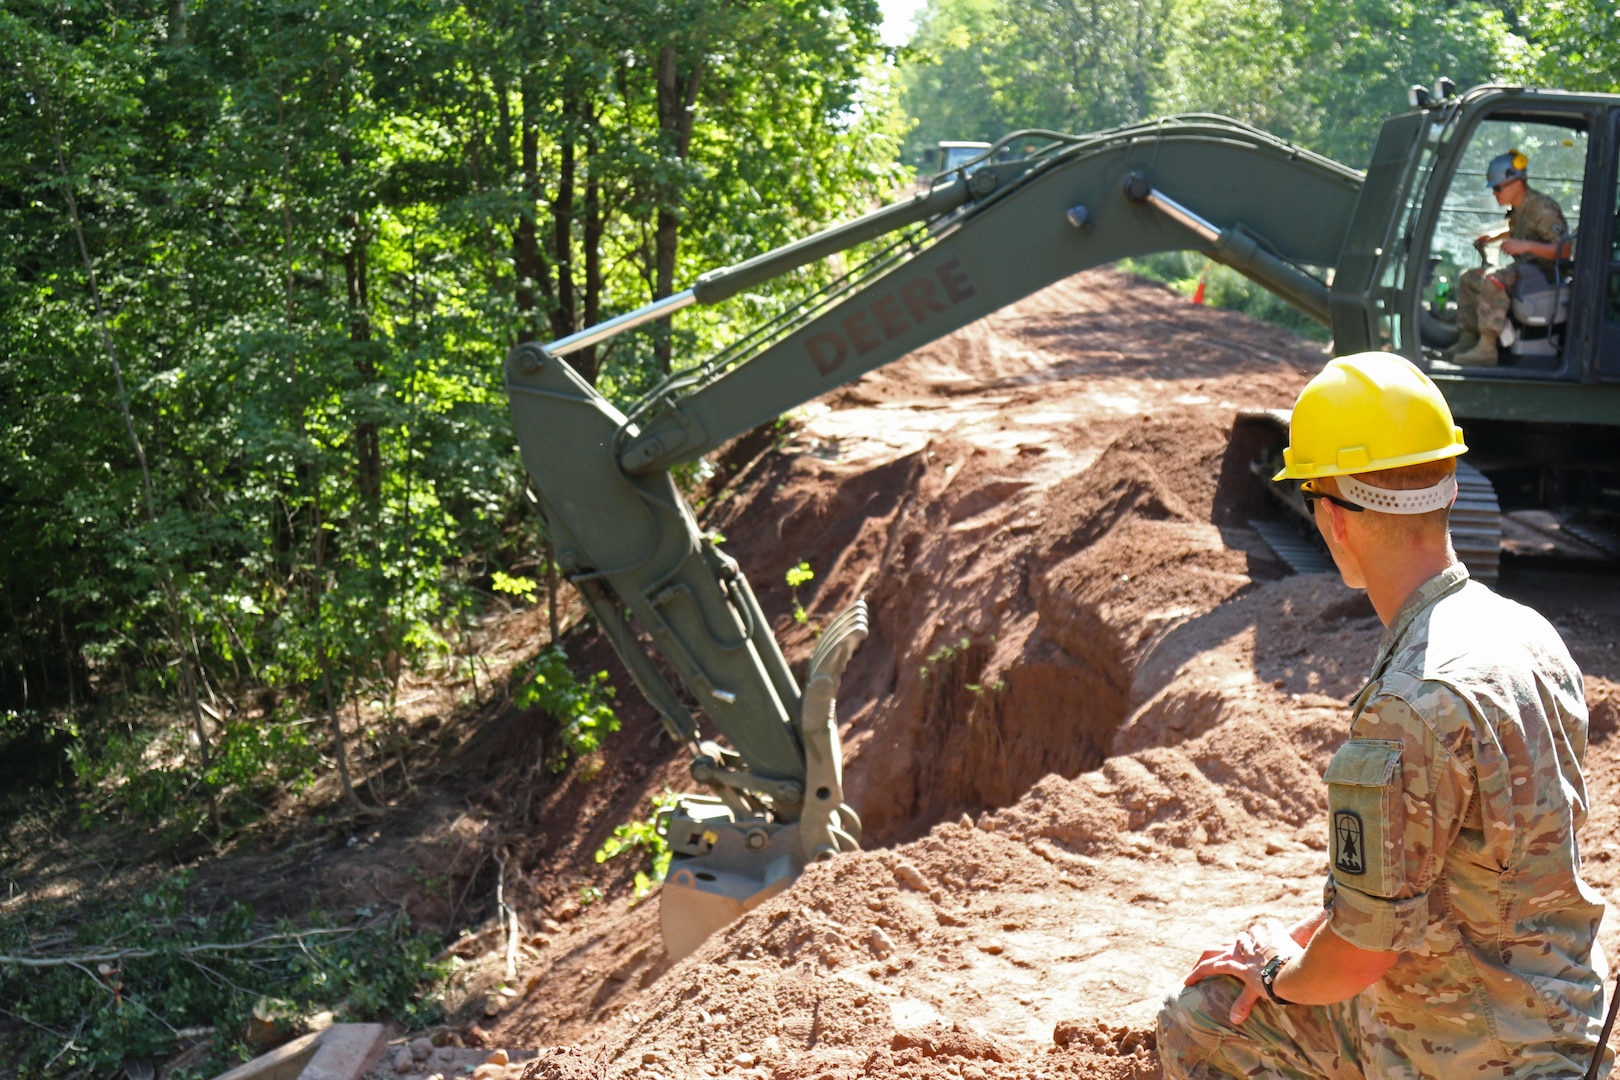 1st Lt. Joshua Steadman supervises Spc. Michael Baldwin, both members of the 229th Engineer Company, while using an excavator to backfill a washed-out culvert along Eade Road in Ashland County, Wisconsin Aug. 9, 2016, as part of flood recovery operations. 